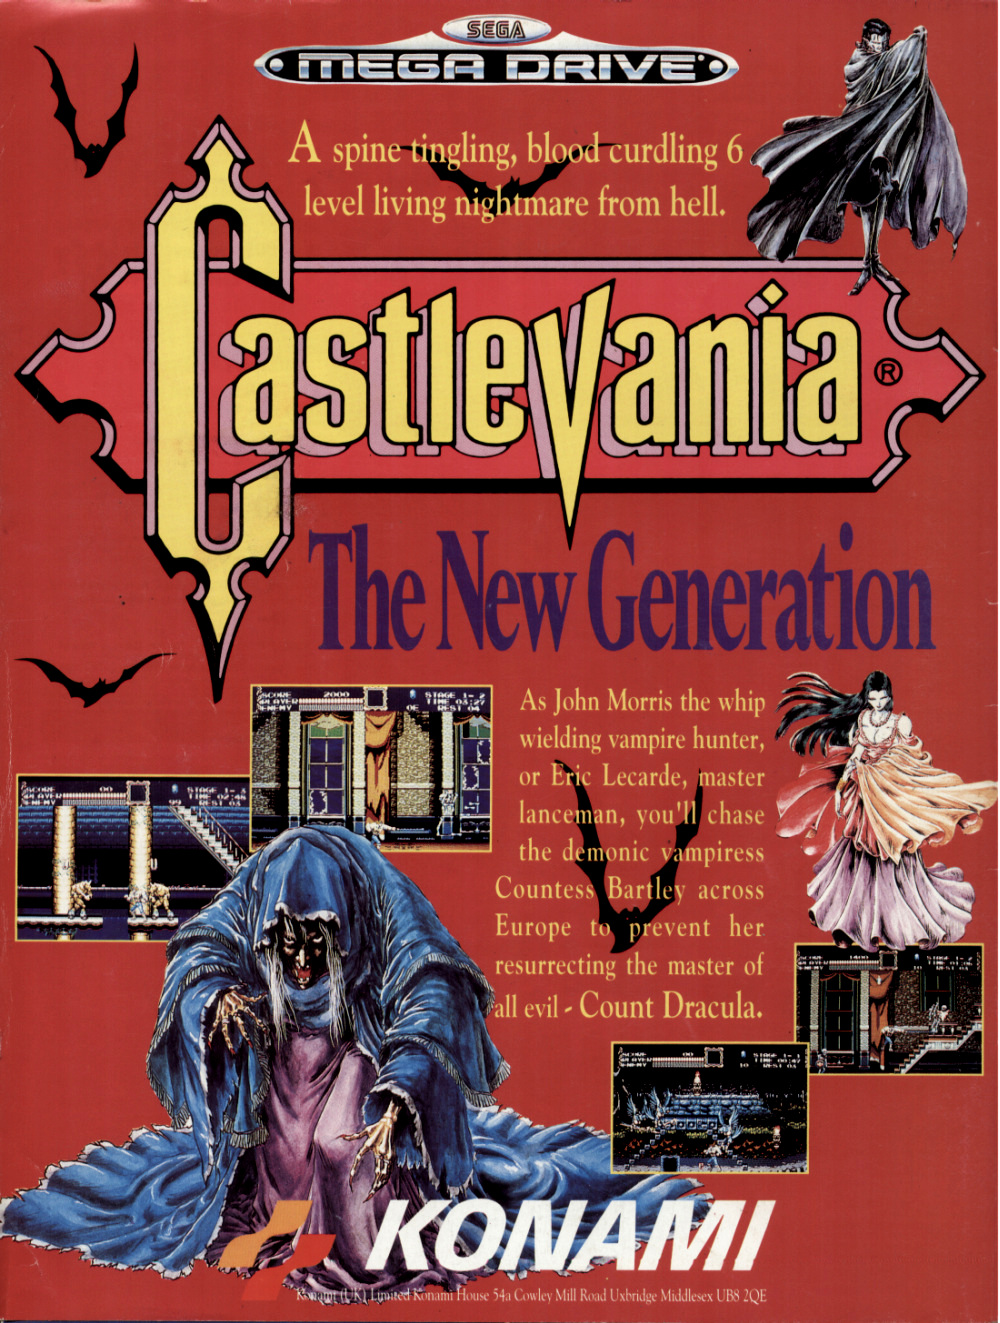 Castlevania Takes the Gaming World by Storm with Free Games: Explore the Dark and Mysterious World of Dracula's Castle